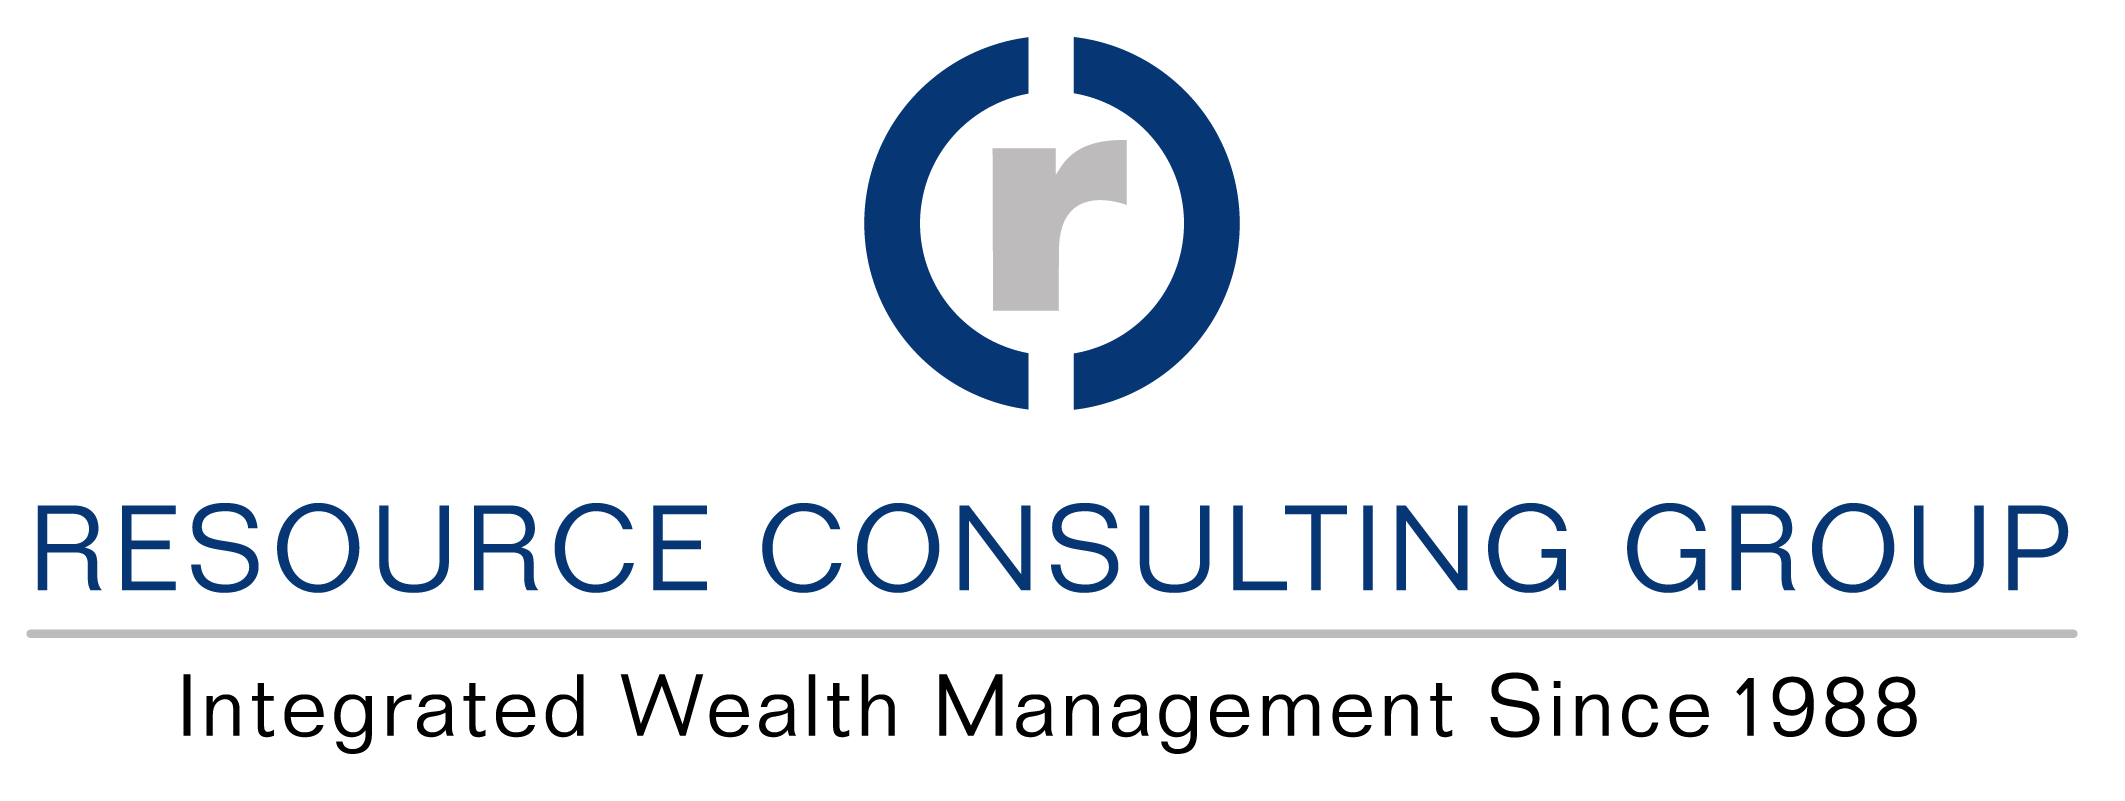 Resource Consulting Group logo